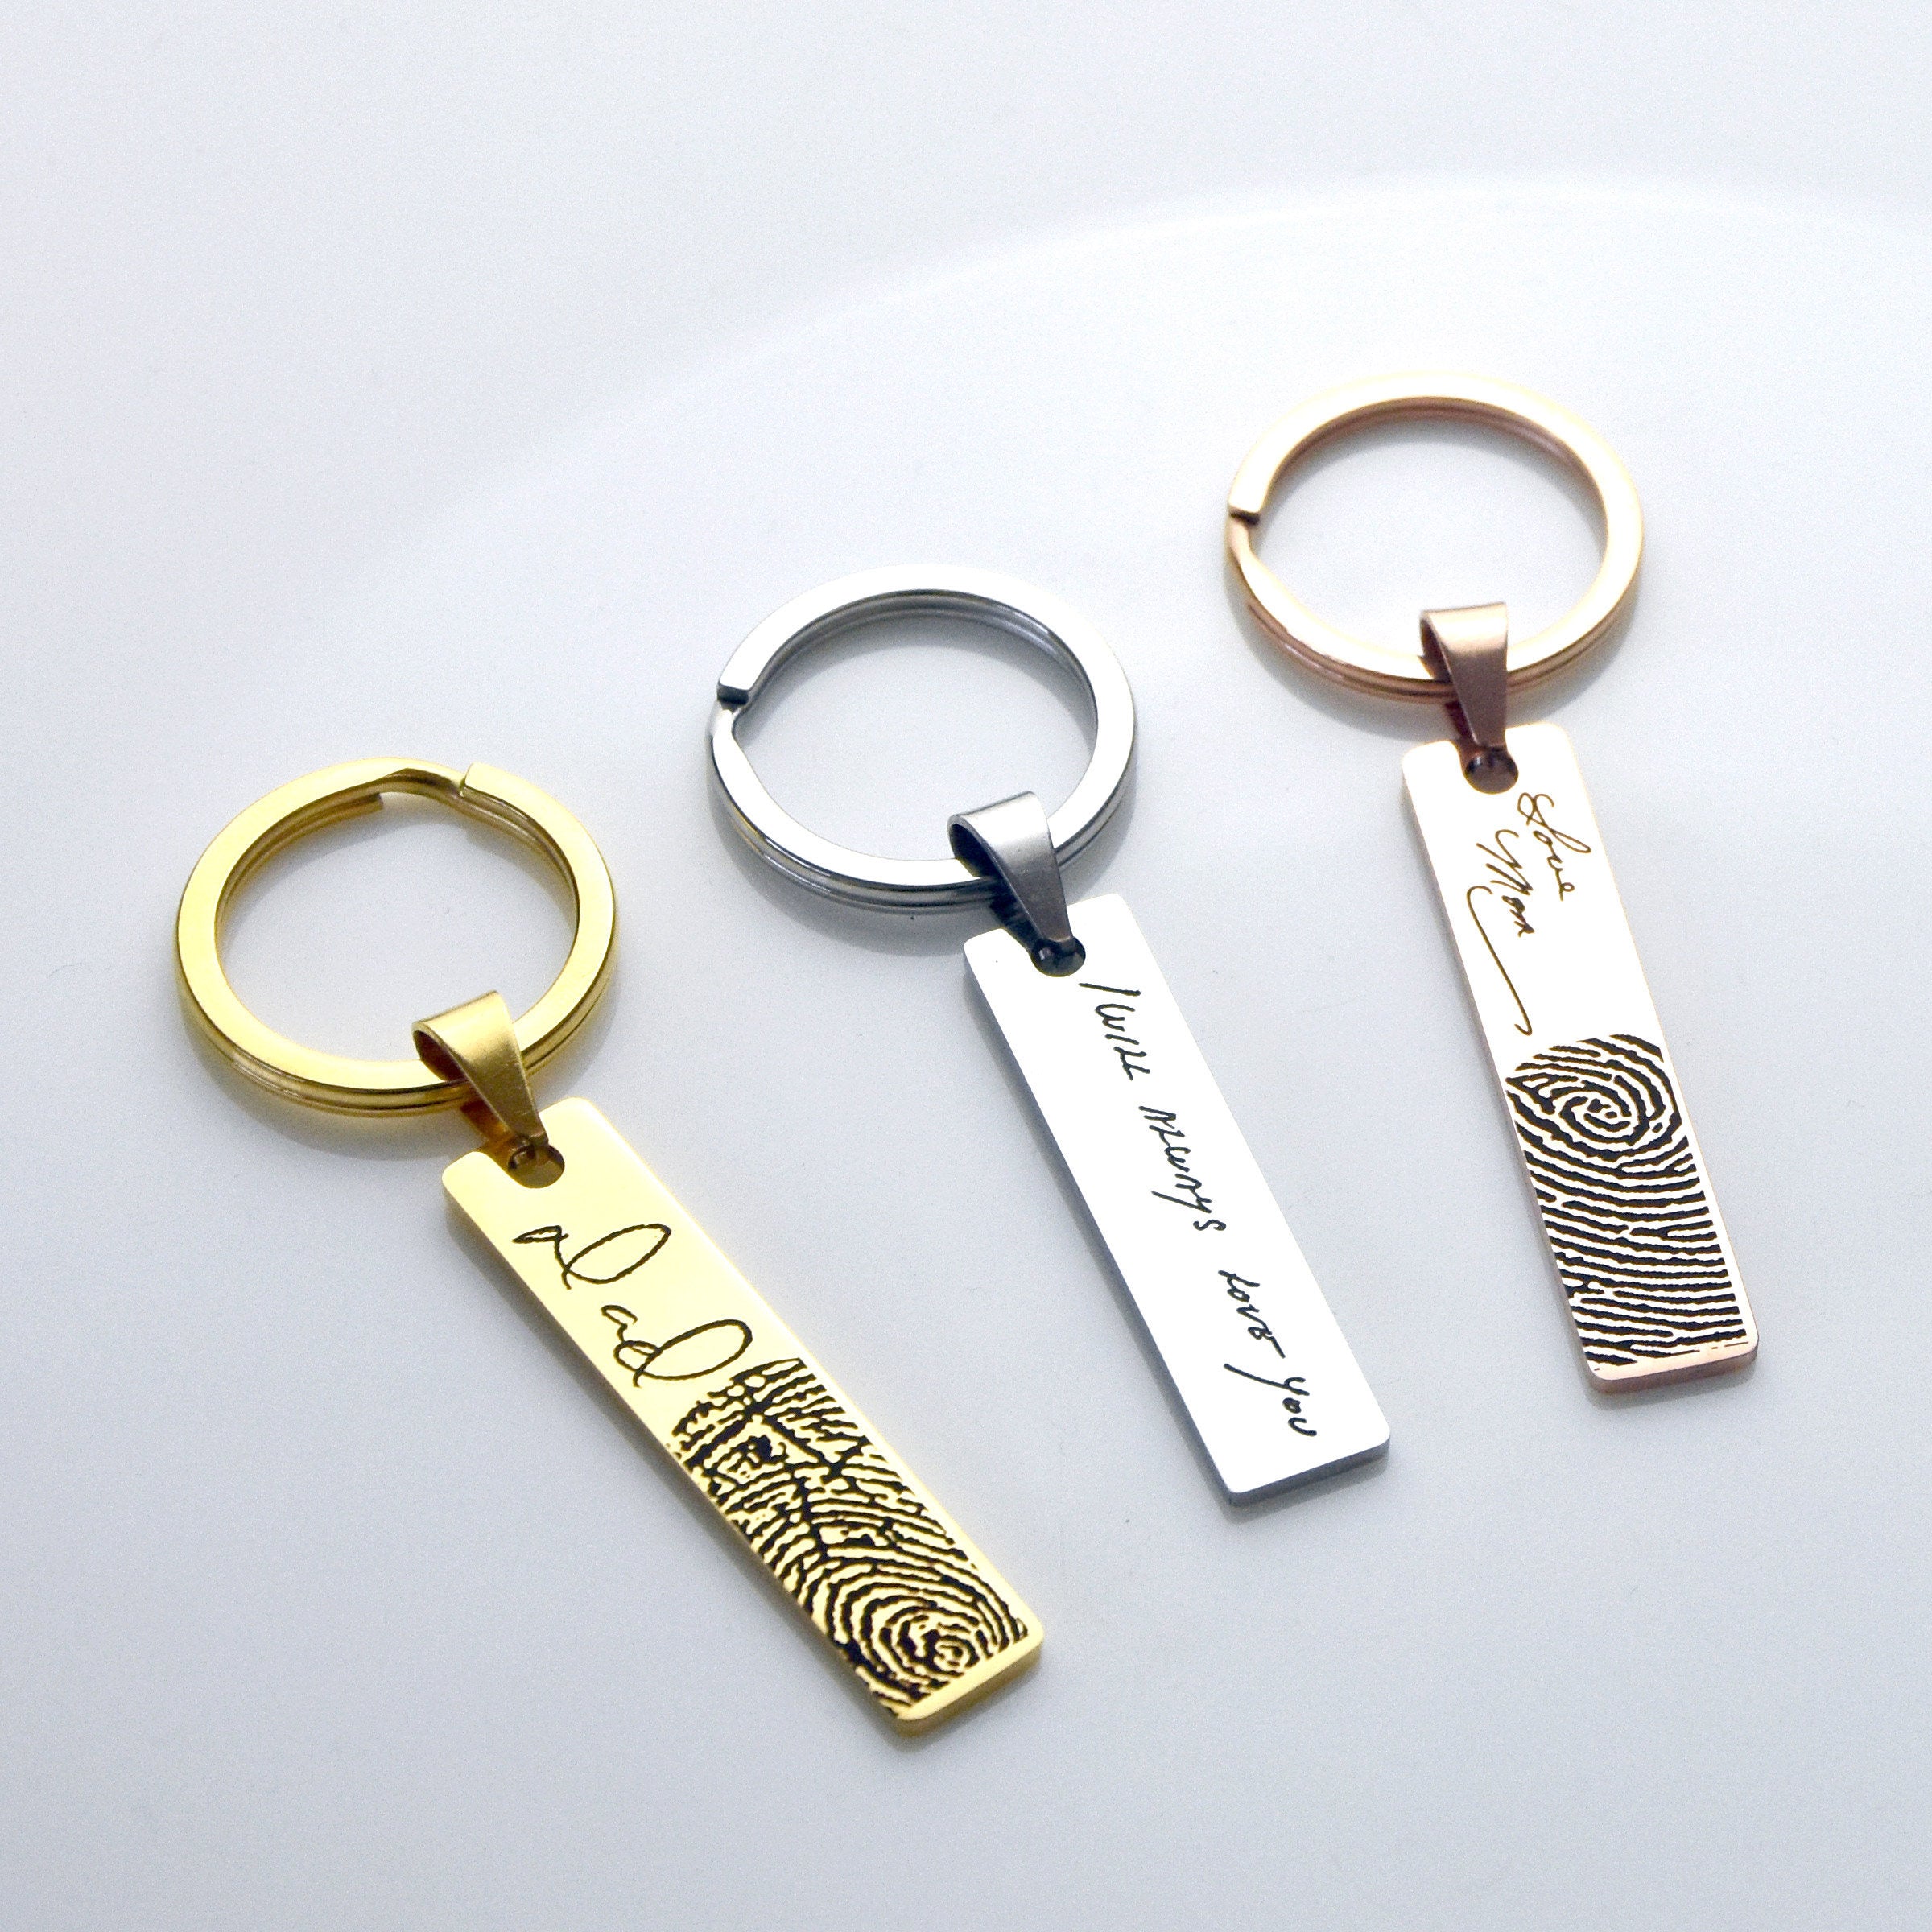 Cheap personalized silver keychains